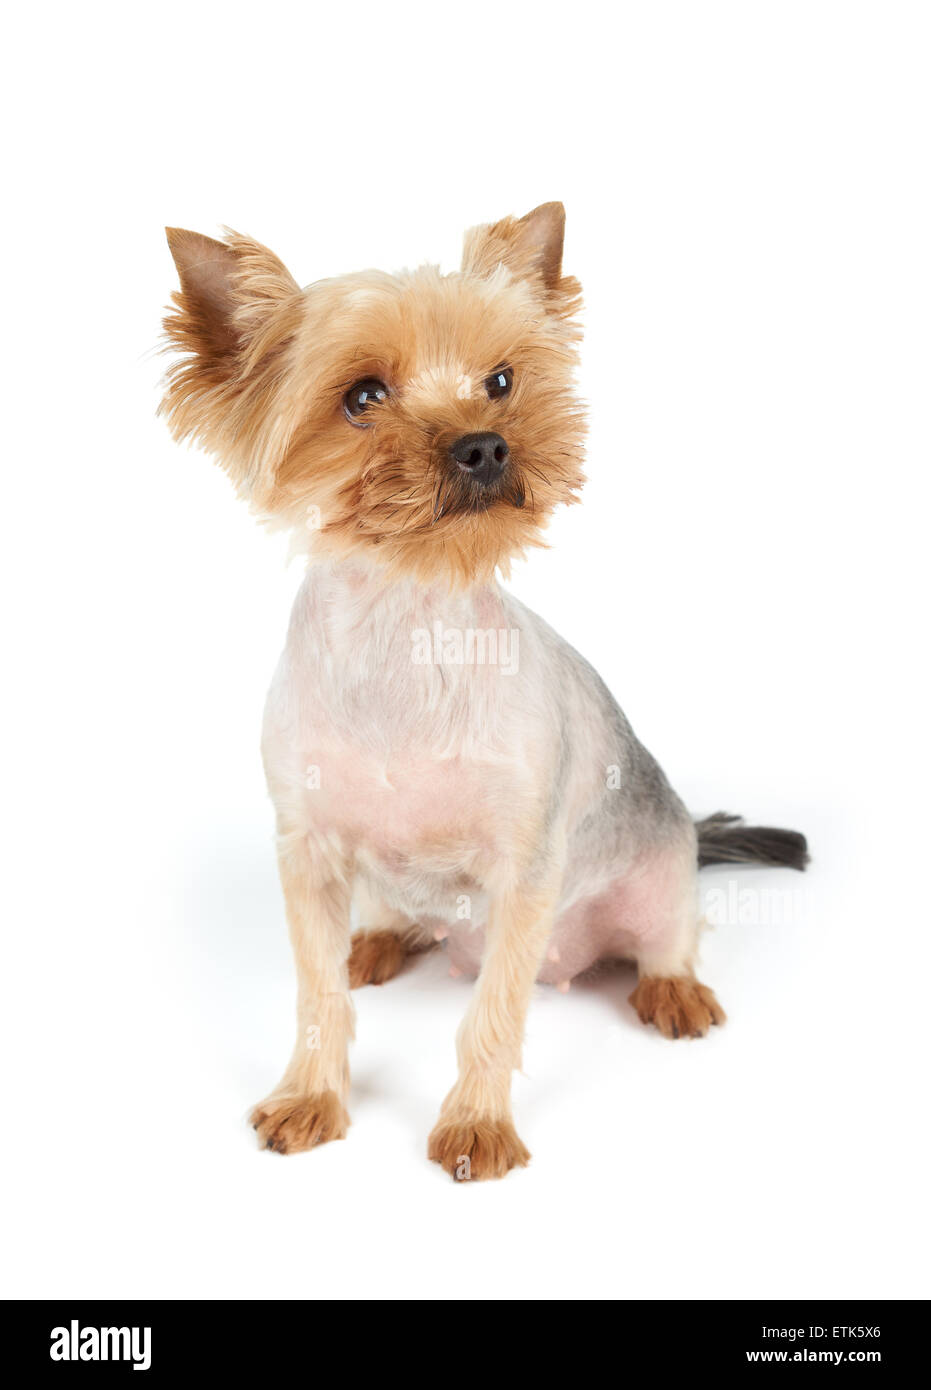 Yorkshire Terrier with funny muzzle looks to the side and sits on white background Stock Photo